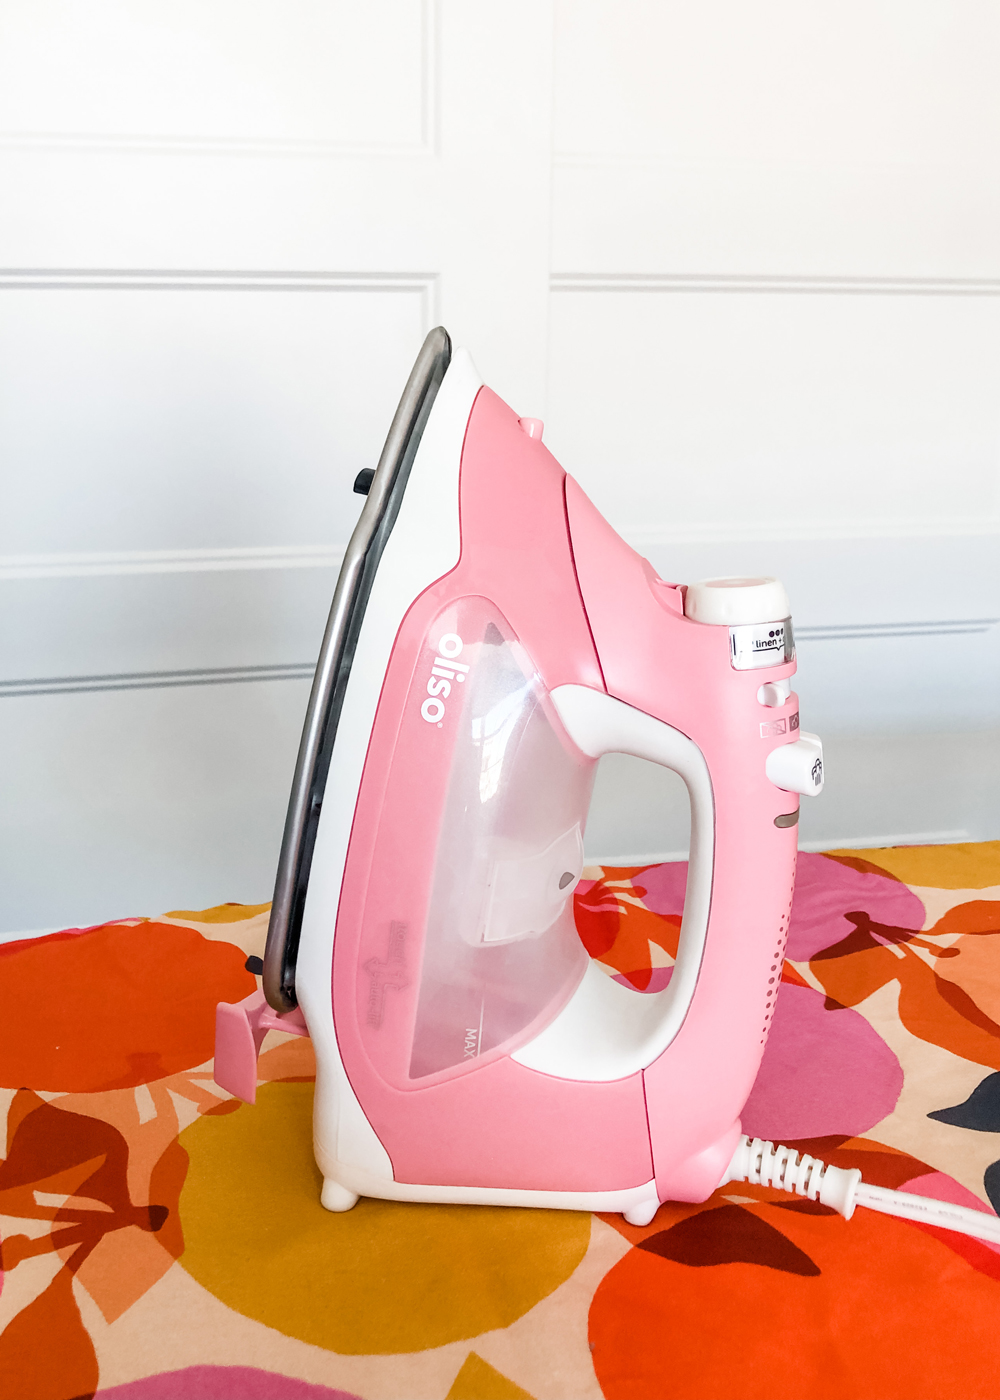 An honest review of the Oliso Iron. It's called a smart iron, but what makes it different than other irons? Is it the best iron for you? suzyquilts.com #sewingiron